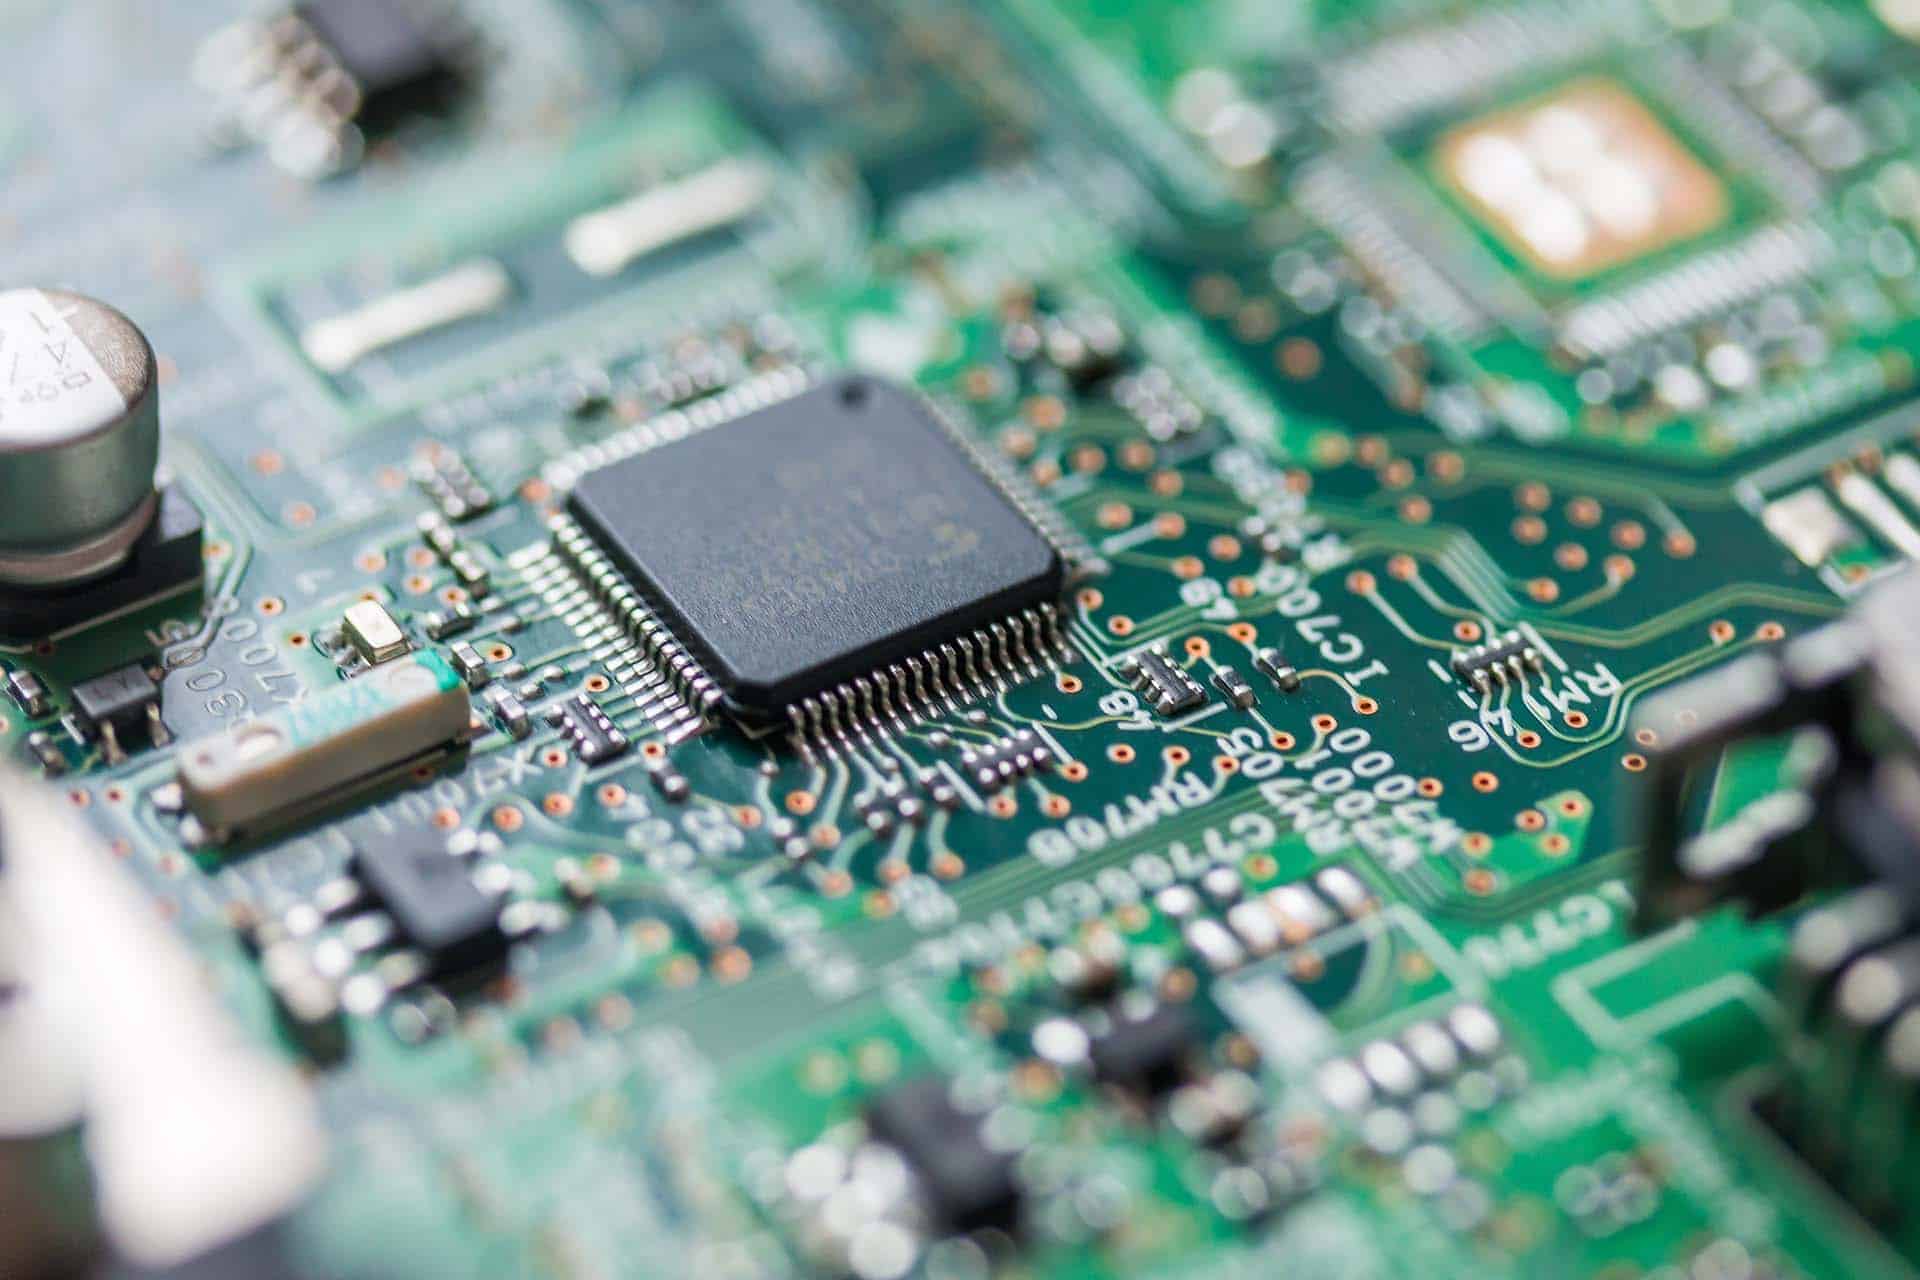 A close up picture of a circuit board